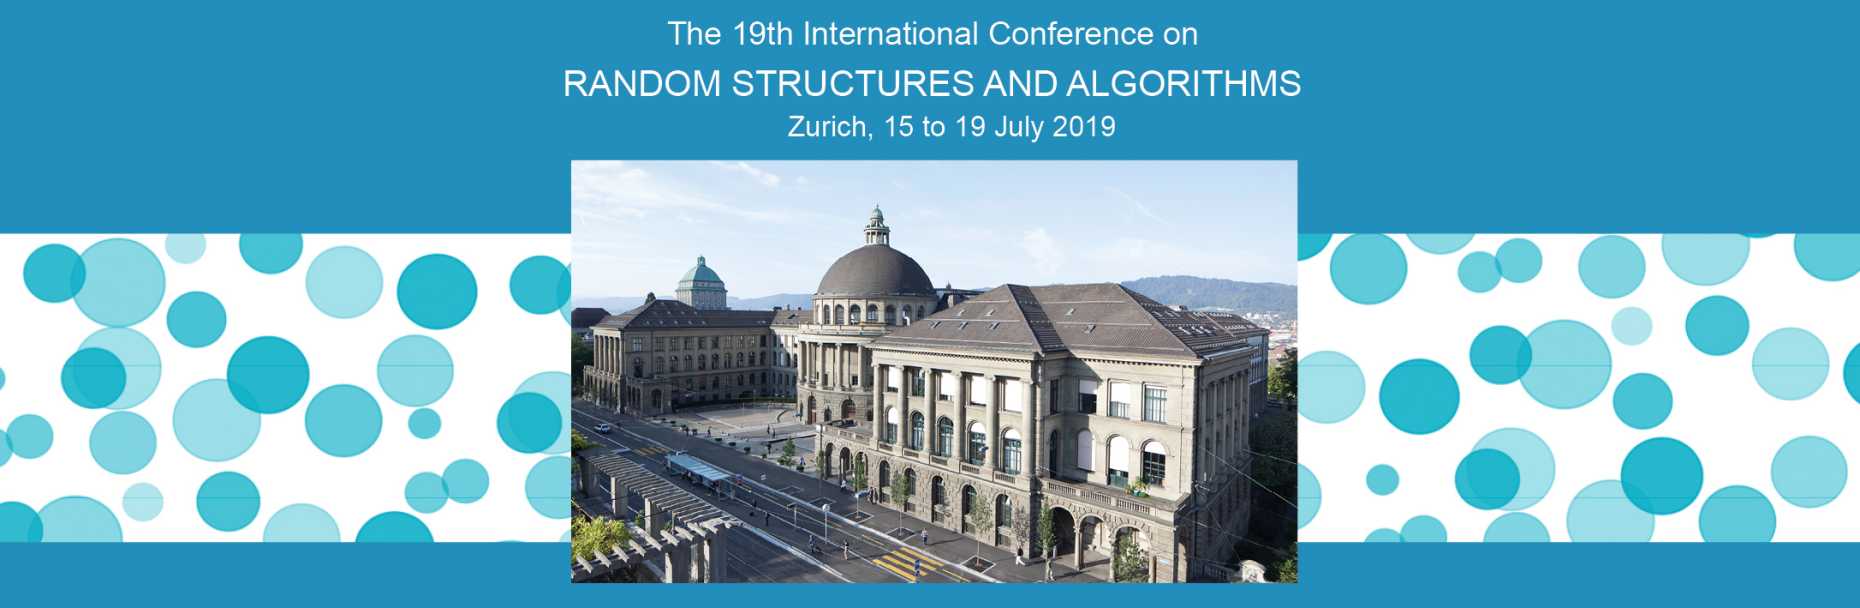 The 19th International Conference on Random Structures and Algorithms